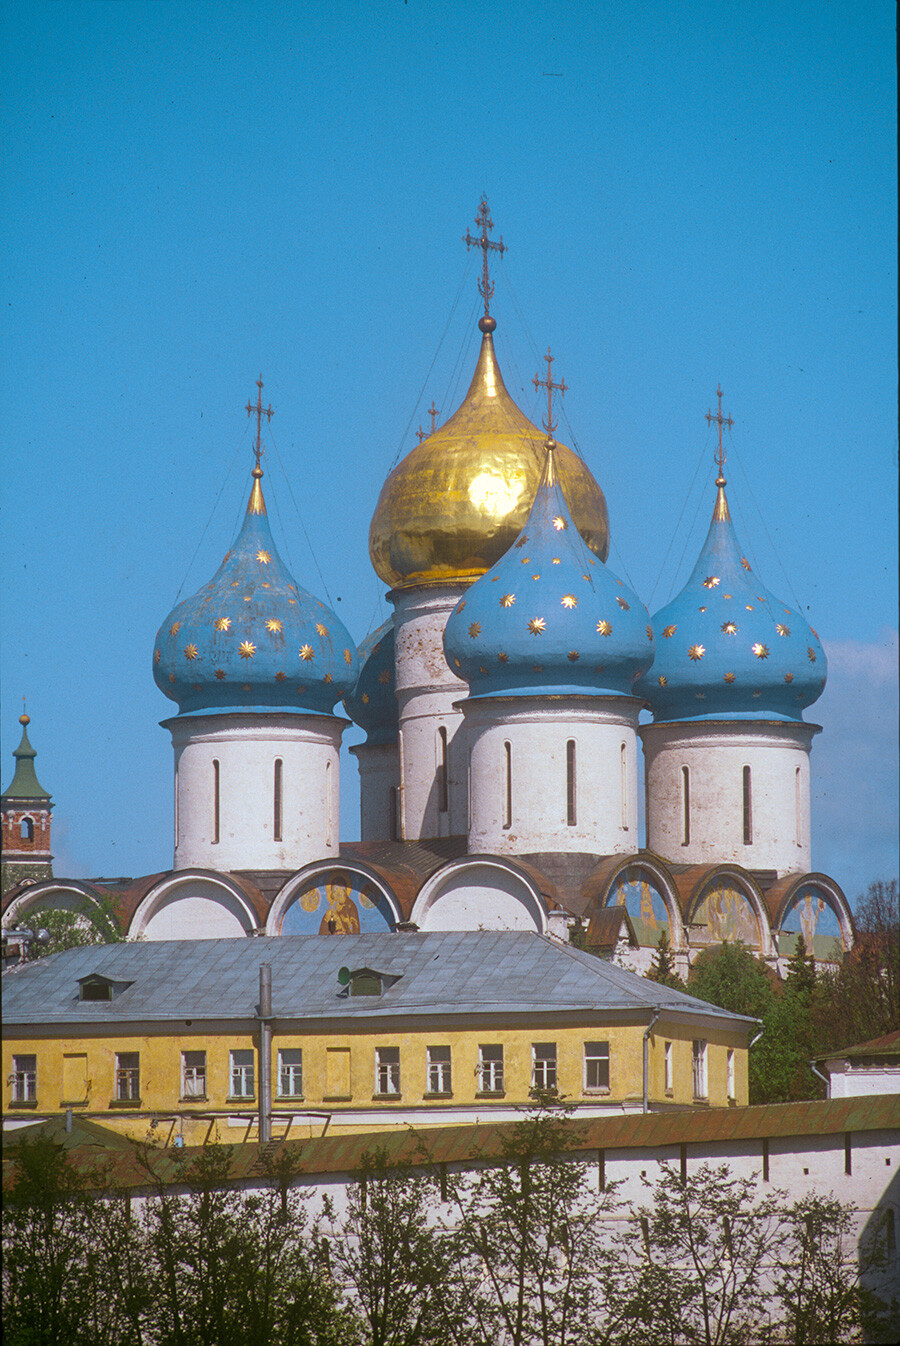 Sergiev Posad, Trinity-St. Sergius Monastery. Dormition Cathedral, southeast view, Foreground: South monastery wall & St. Barbara Cloisters. May 29, 1999